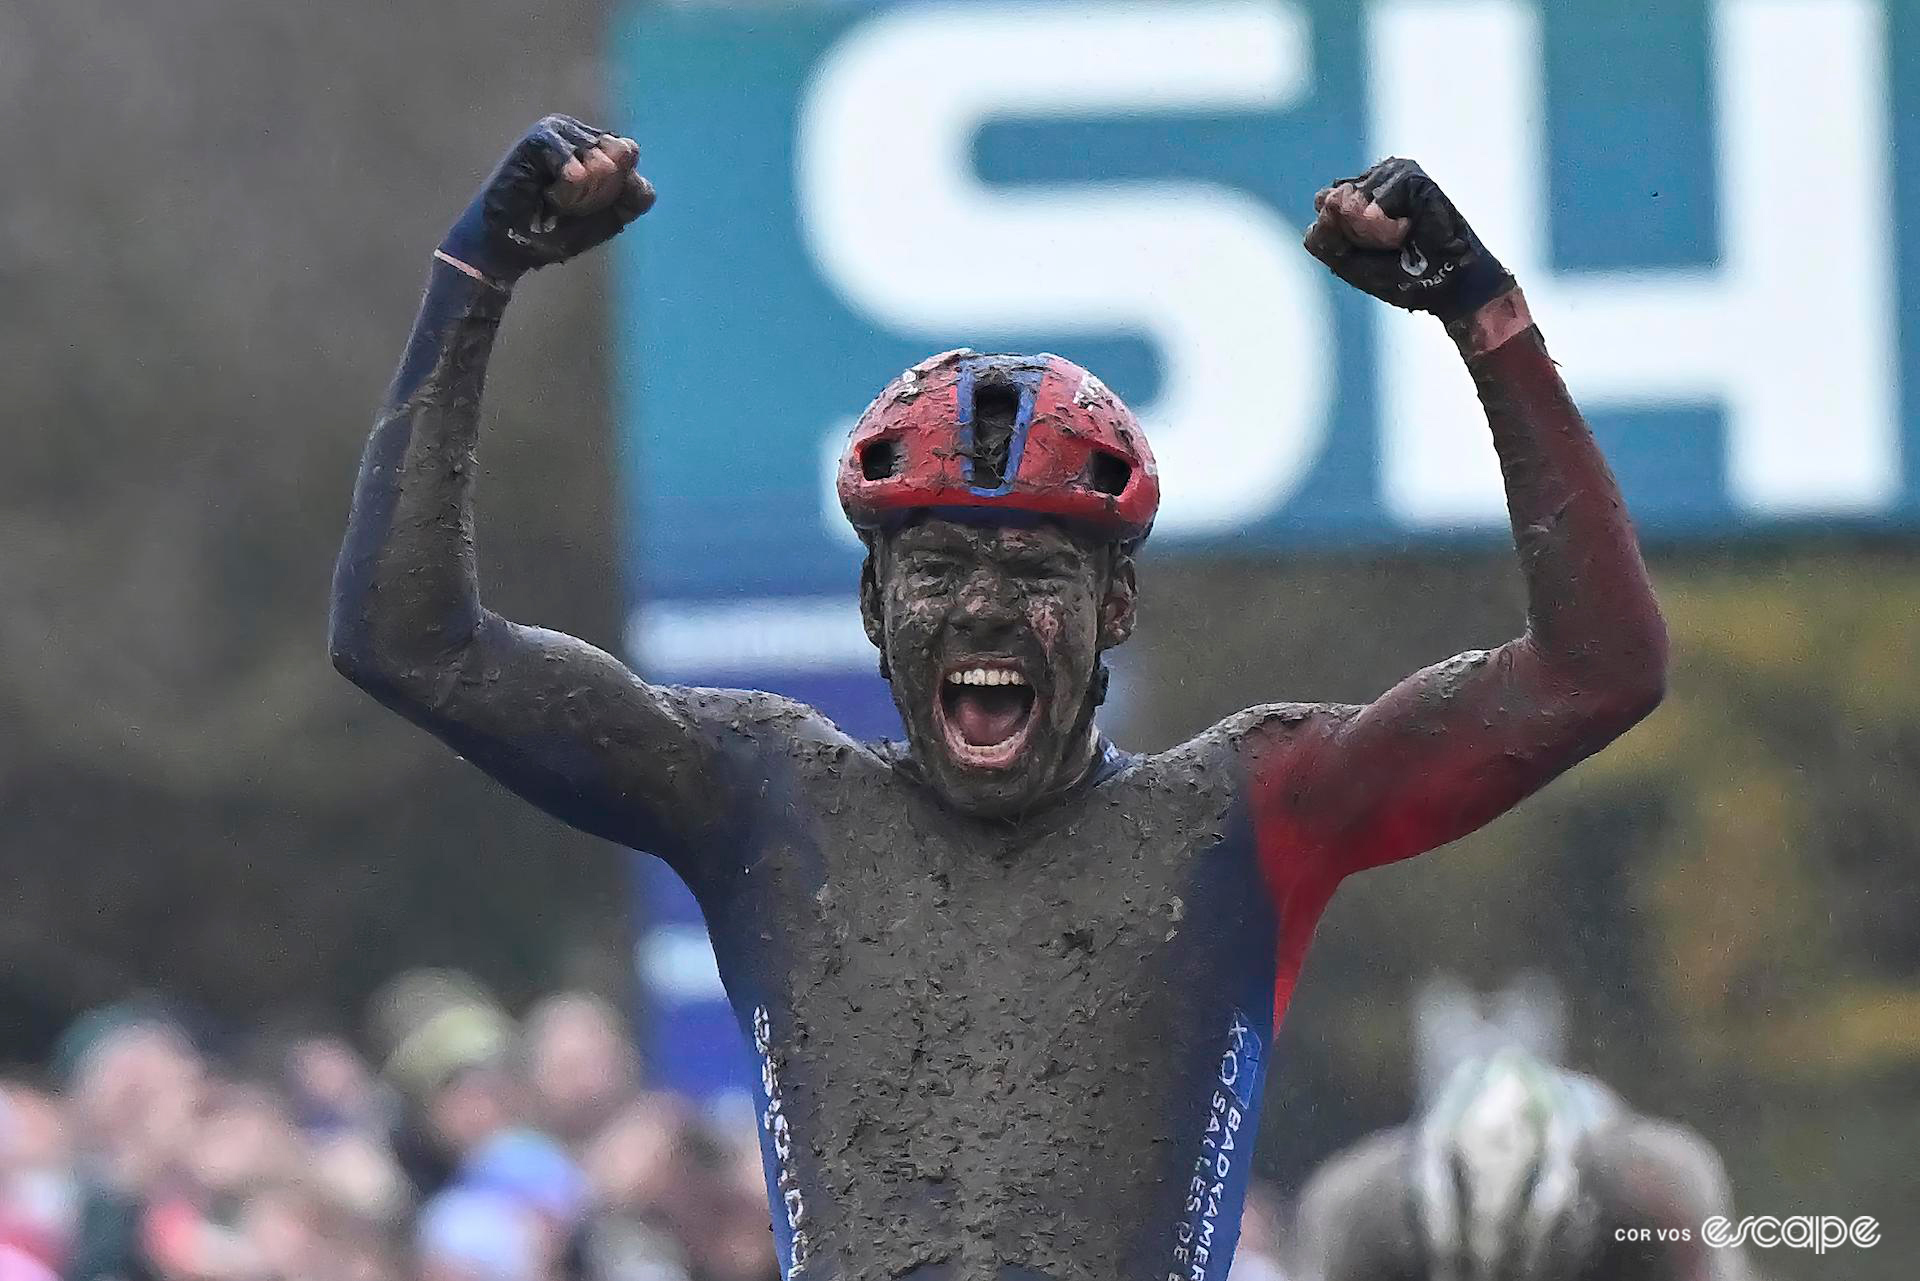 Medium shot of Pim Ronhaar of Baloise Trek Lions, the front of his jersey and face caked in dark mud, as he raises both fists in the air and roars to celebrate CX World Cup Dublin victory over Laurens Sweeck, whose head is bowed in the background.